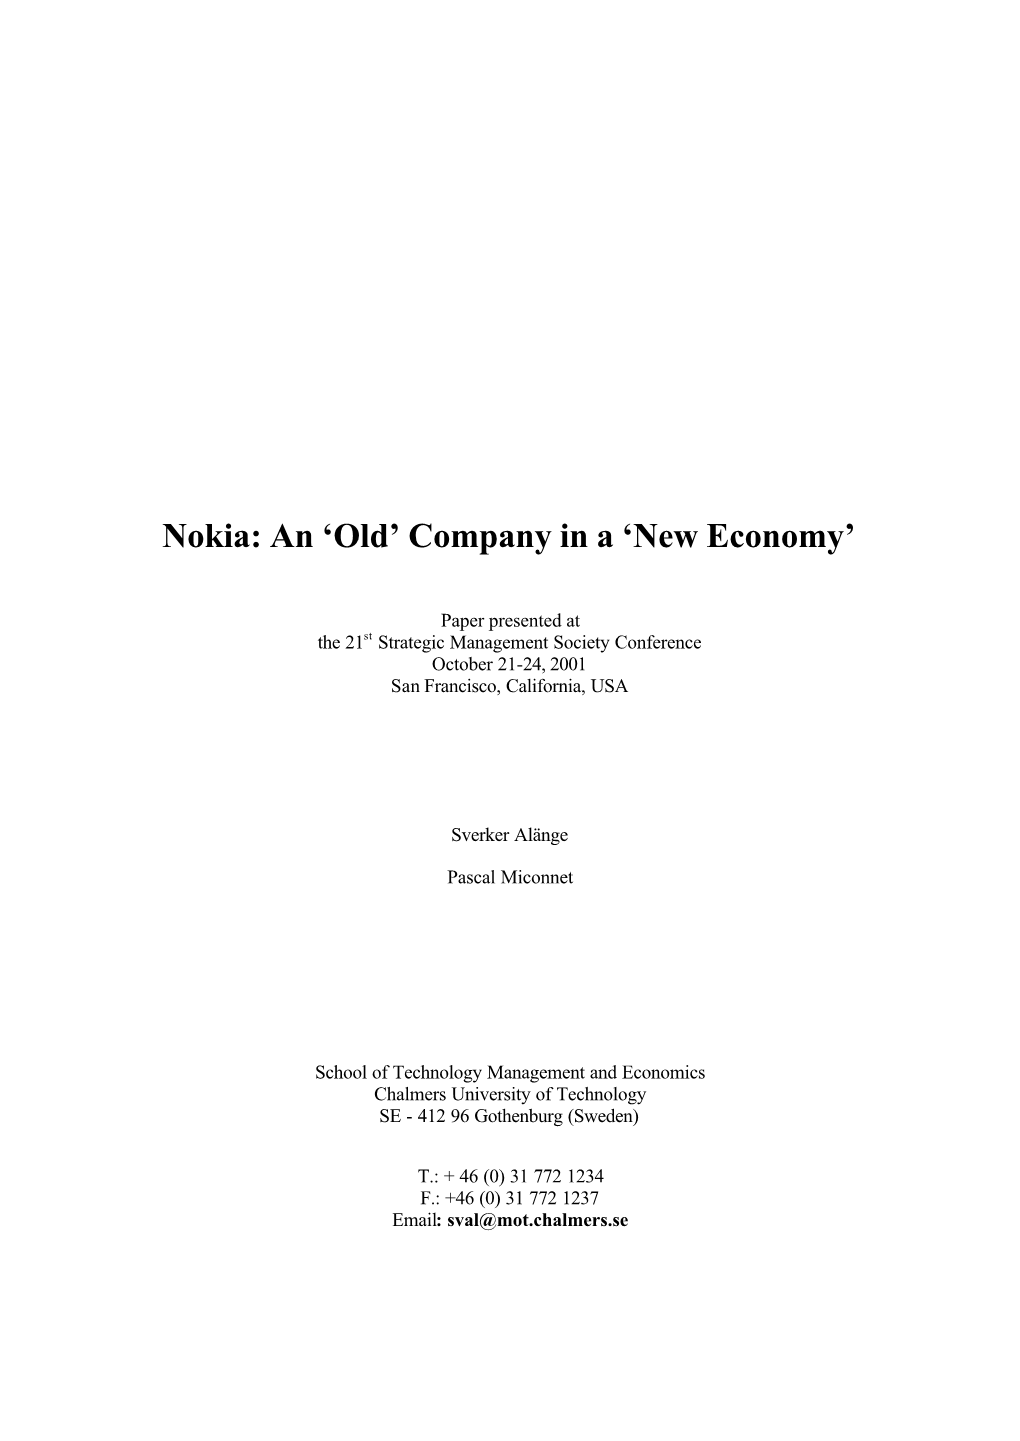 Nokia: an ‘Old’ Company in a ‘New Economy’